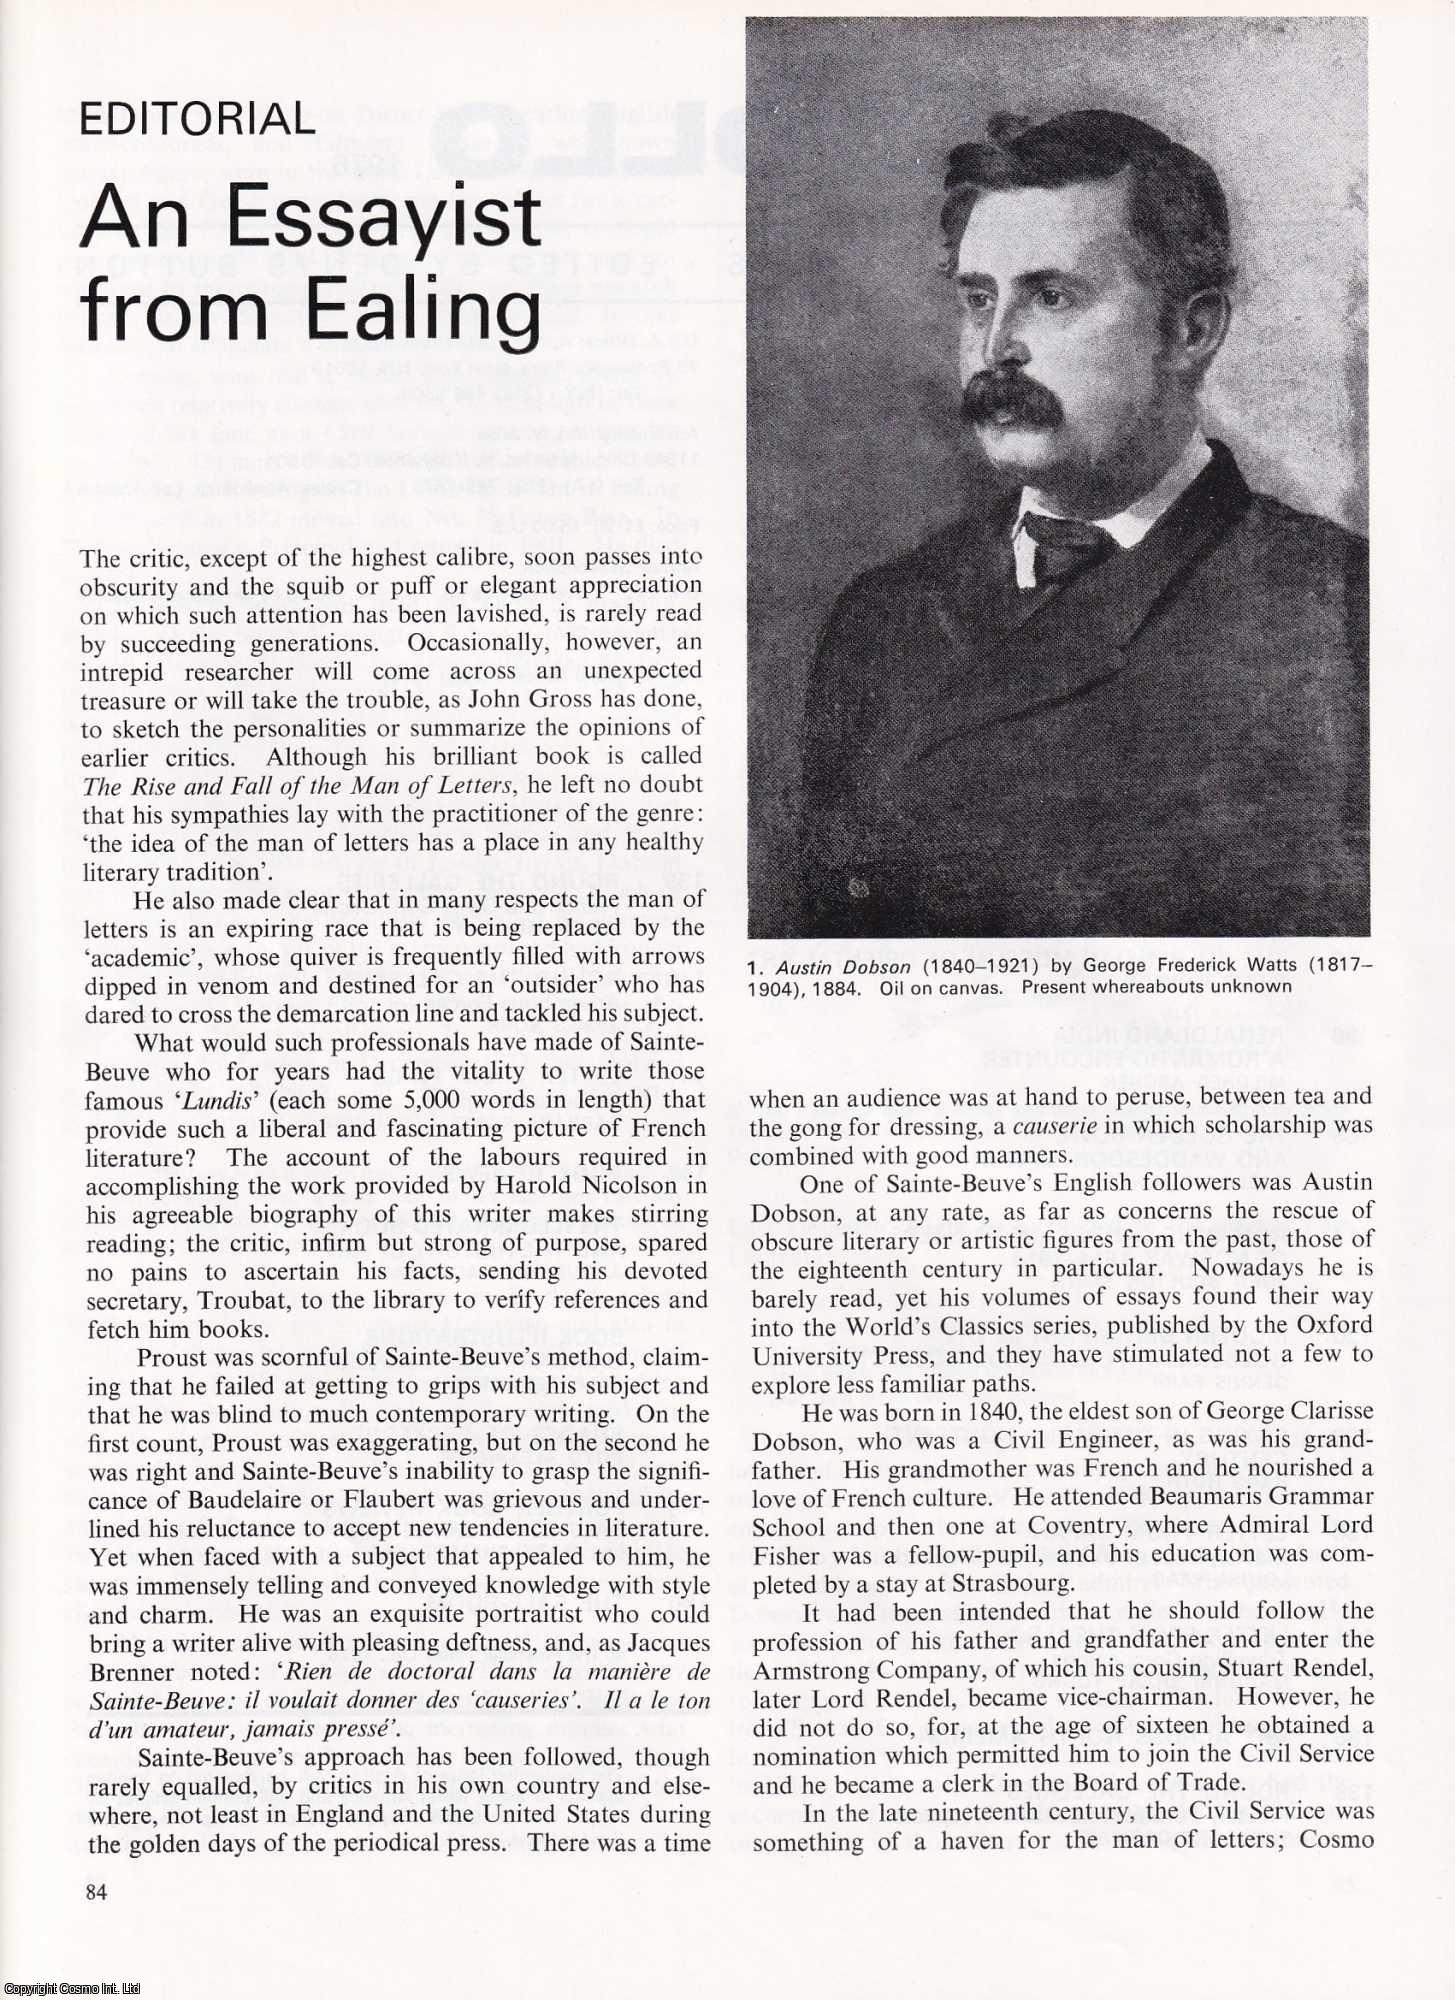 MAN OF LETTERS - Austin Dobson : An Essayist from Ealing. An uncommon original article from Apollo, International Magazine of the Arts, 1976.